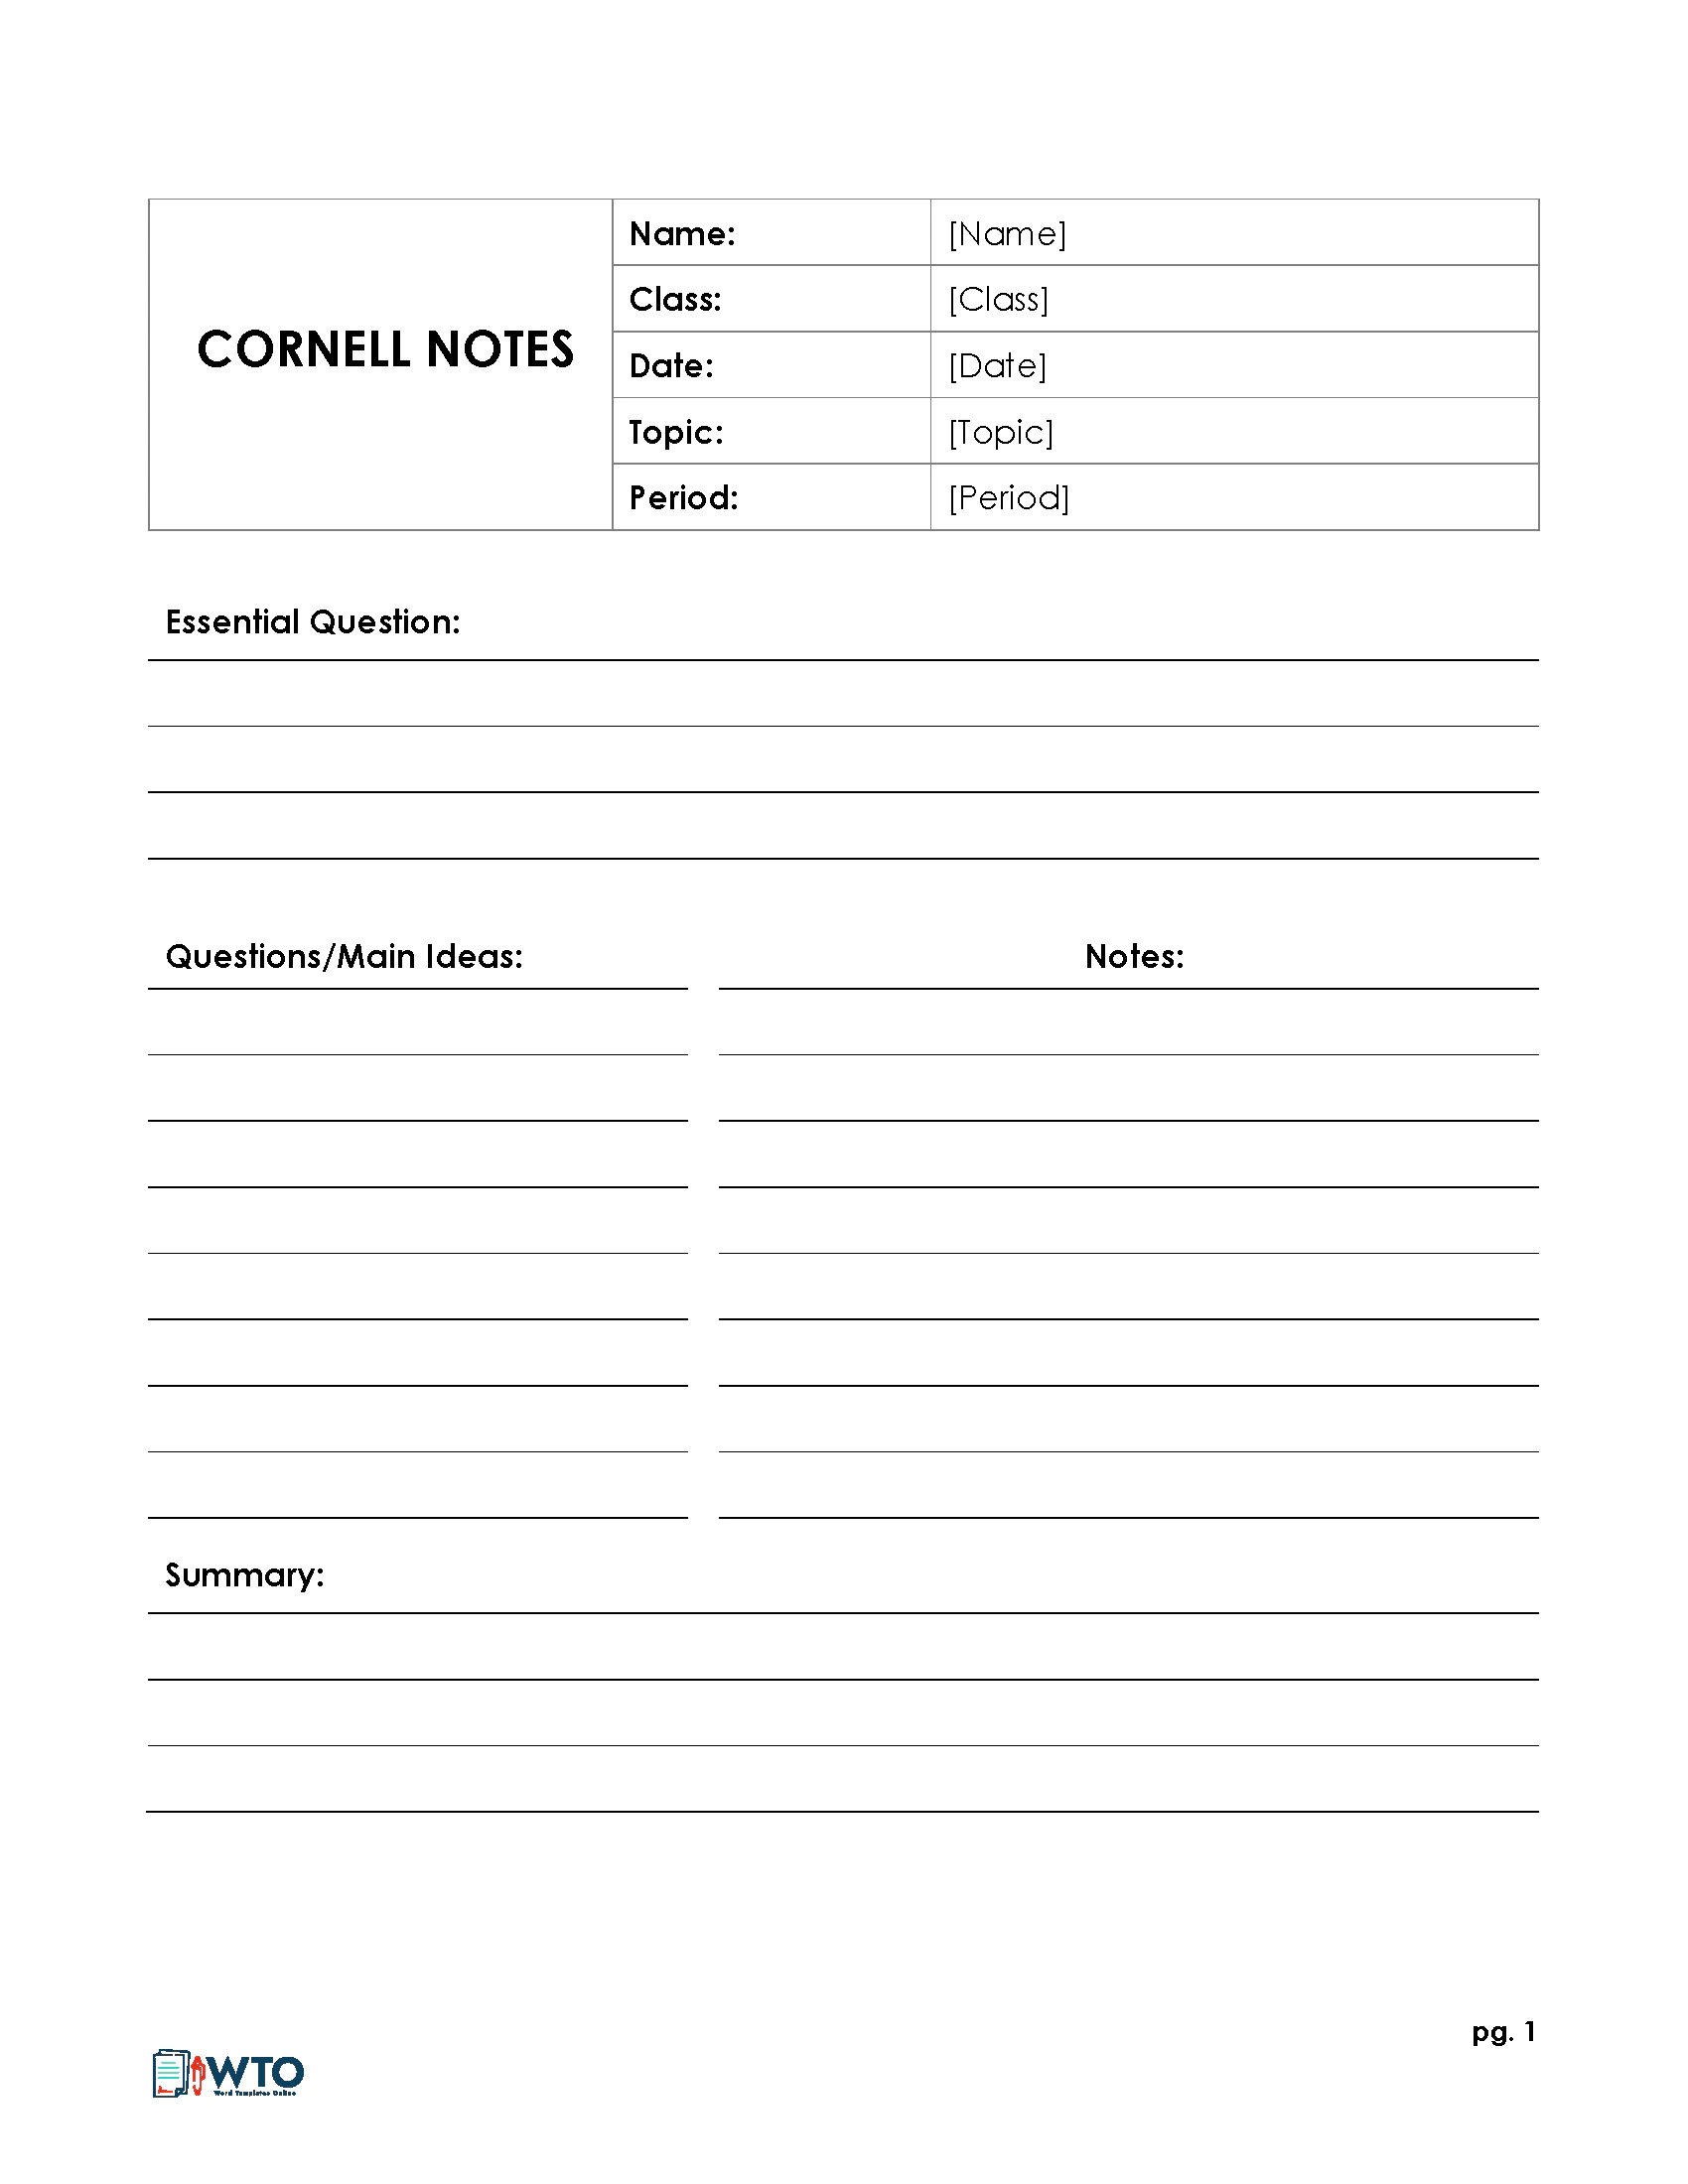 22 Free Cornell Note Templates (Cornell Note Taking Explained) Inside Cornell Note Template Word